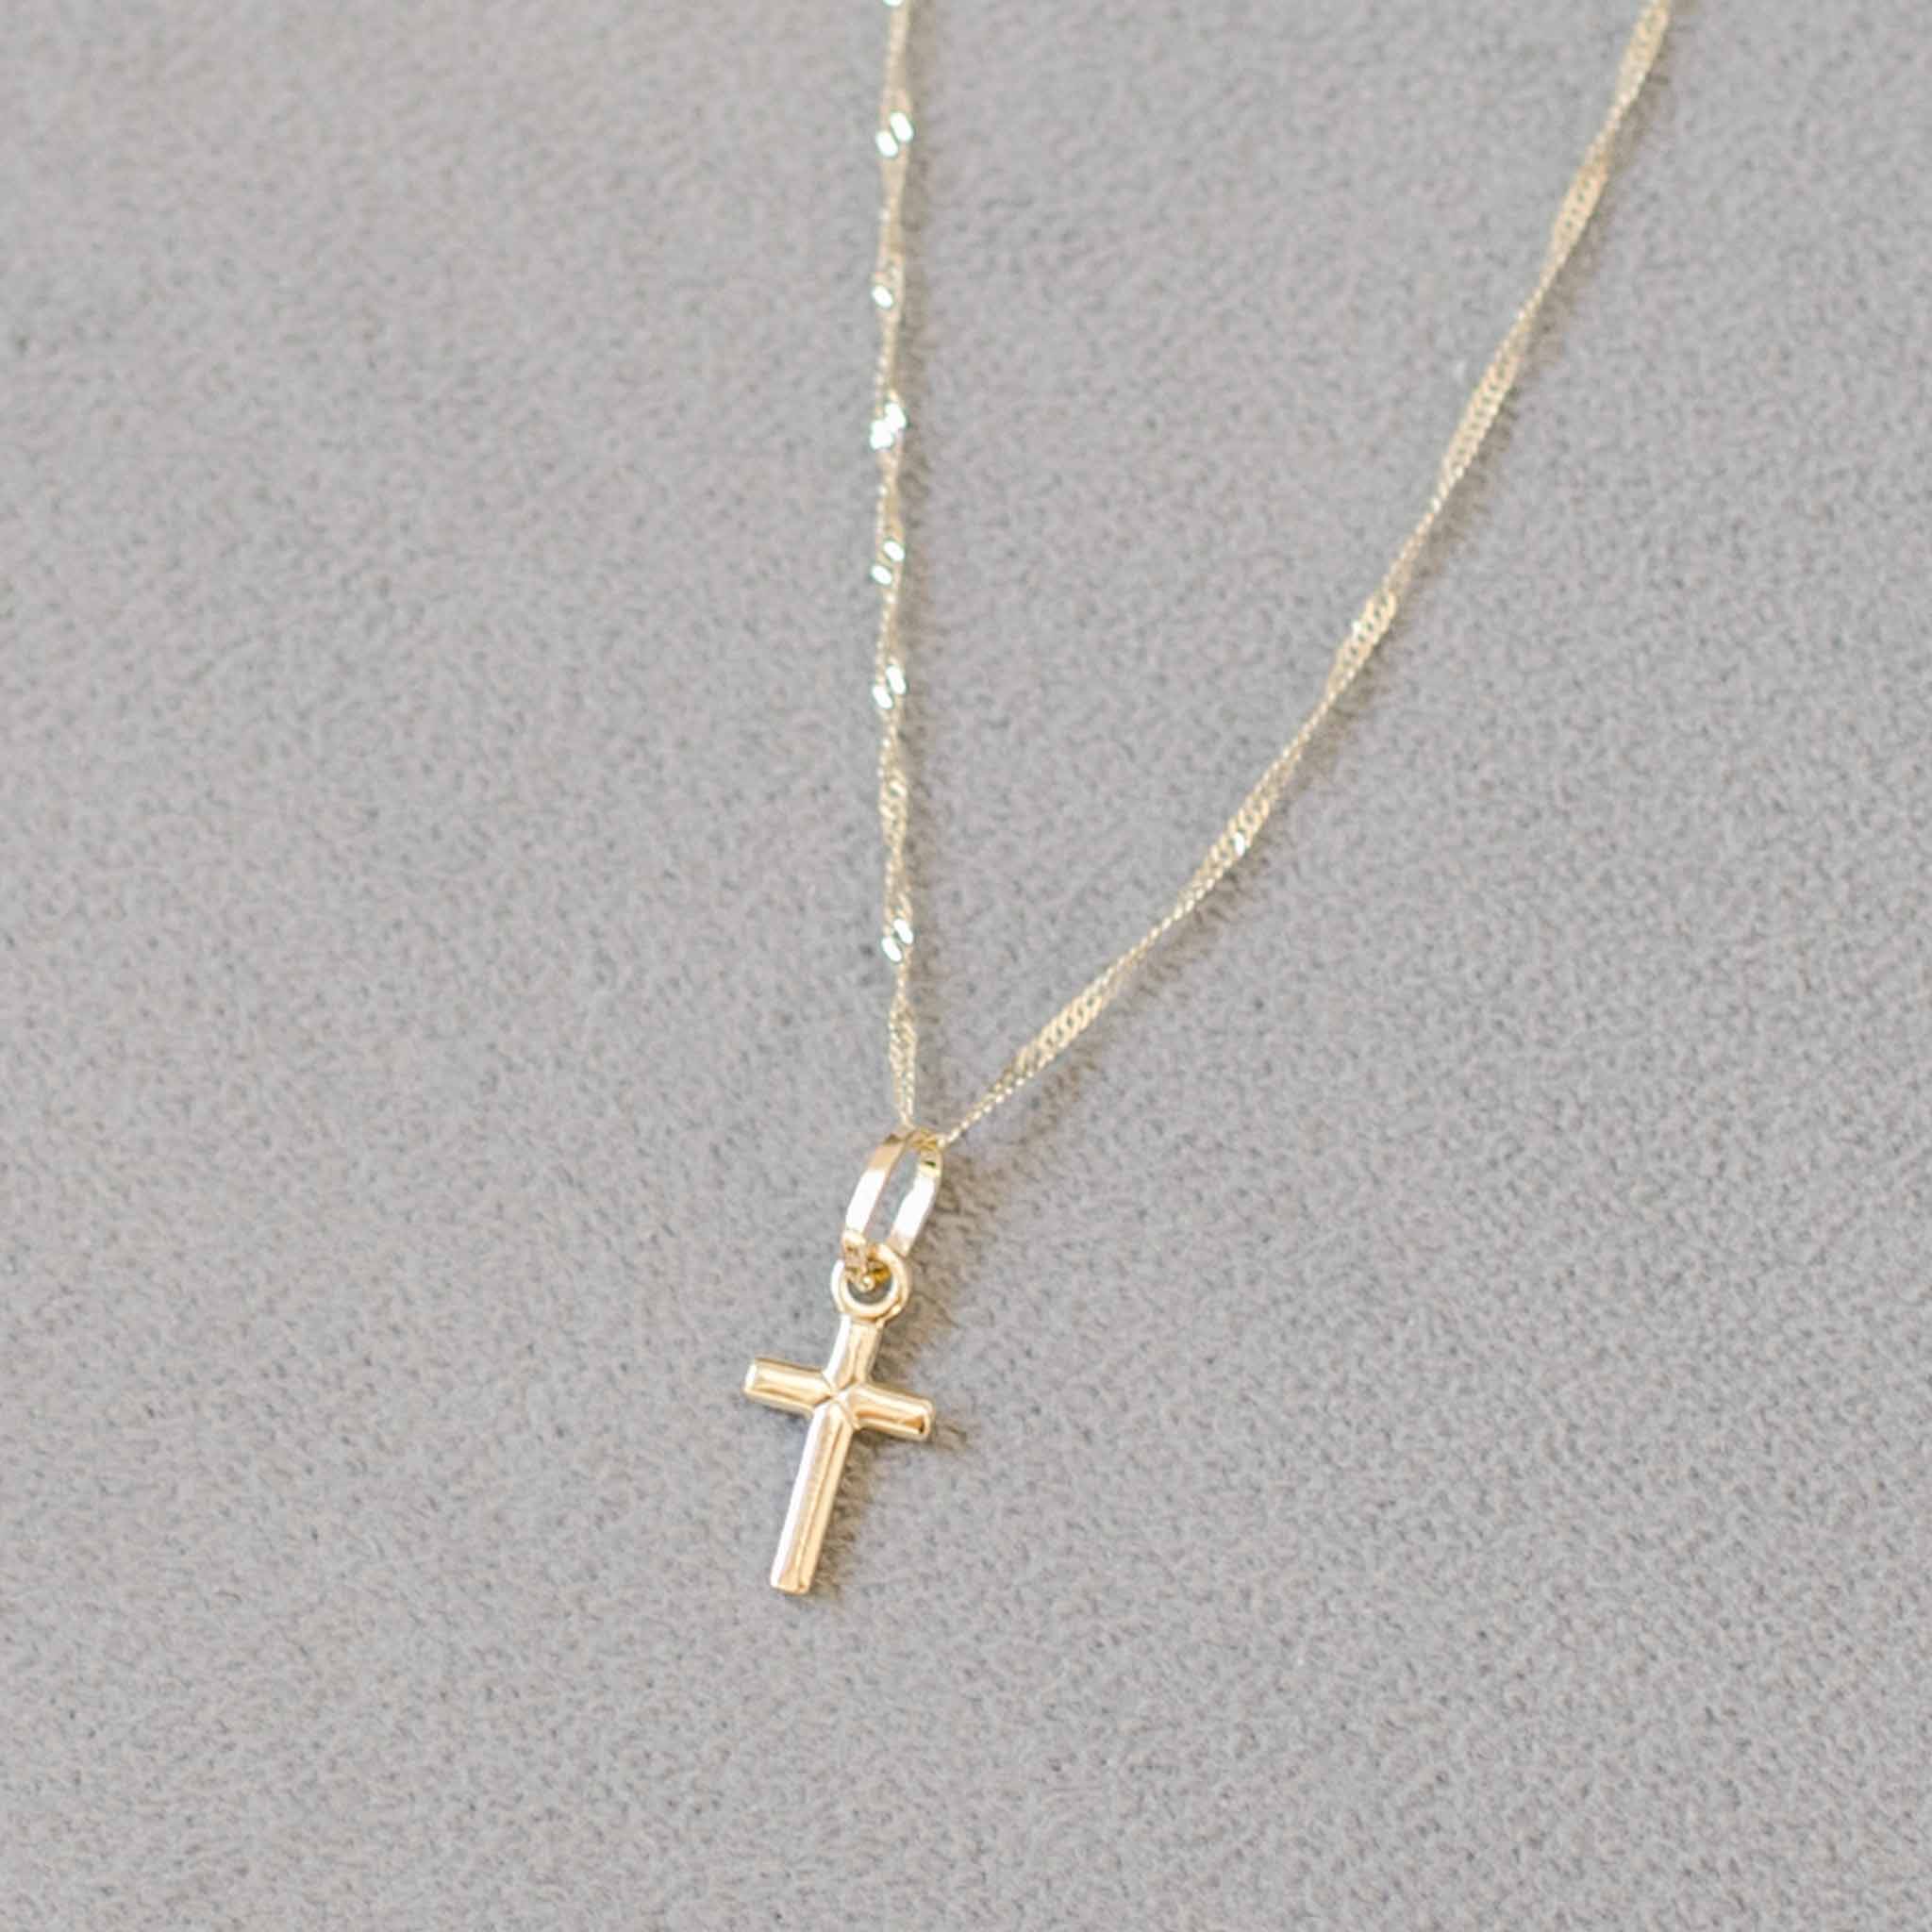 Cross 14K Small Gold Chain Close Up 1173